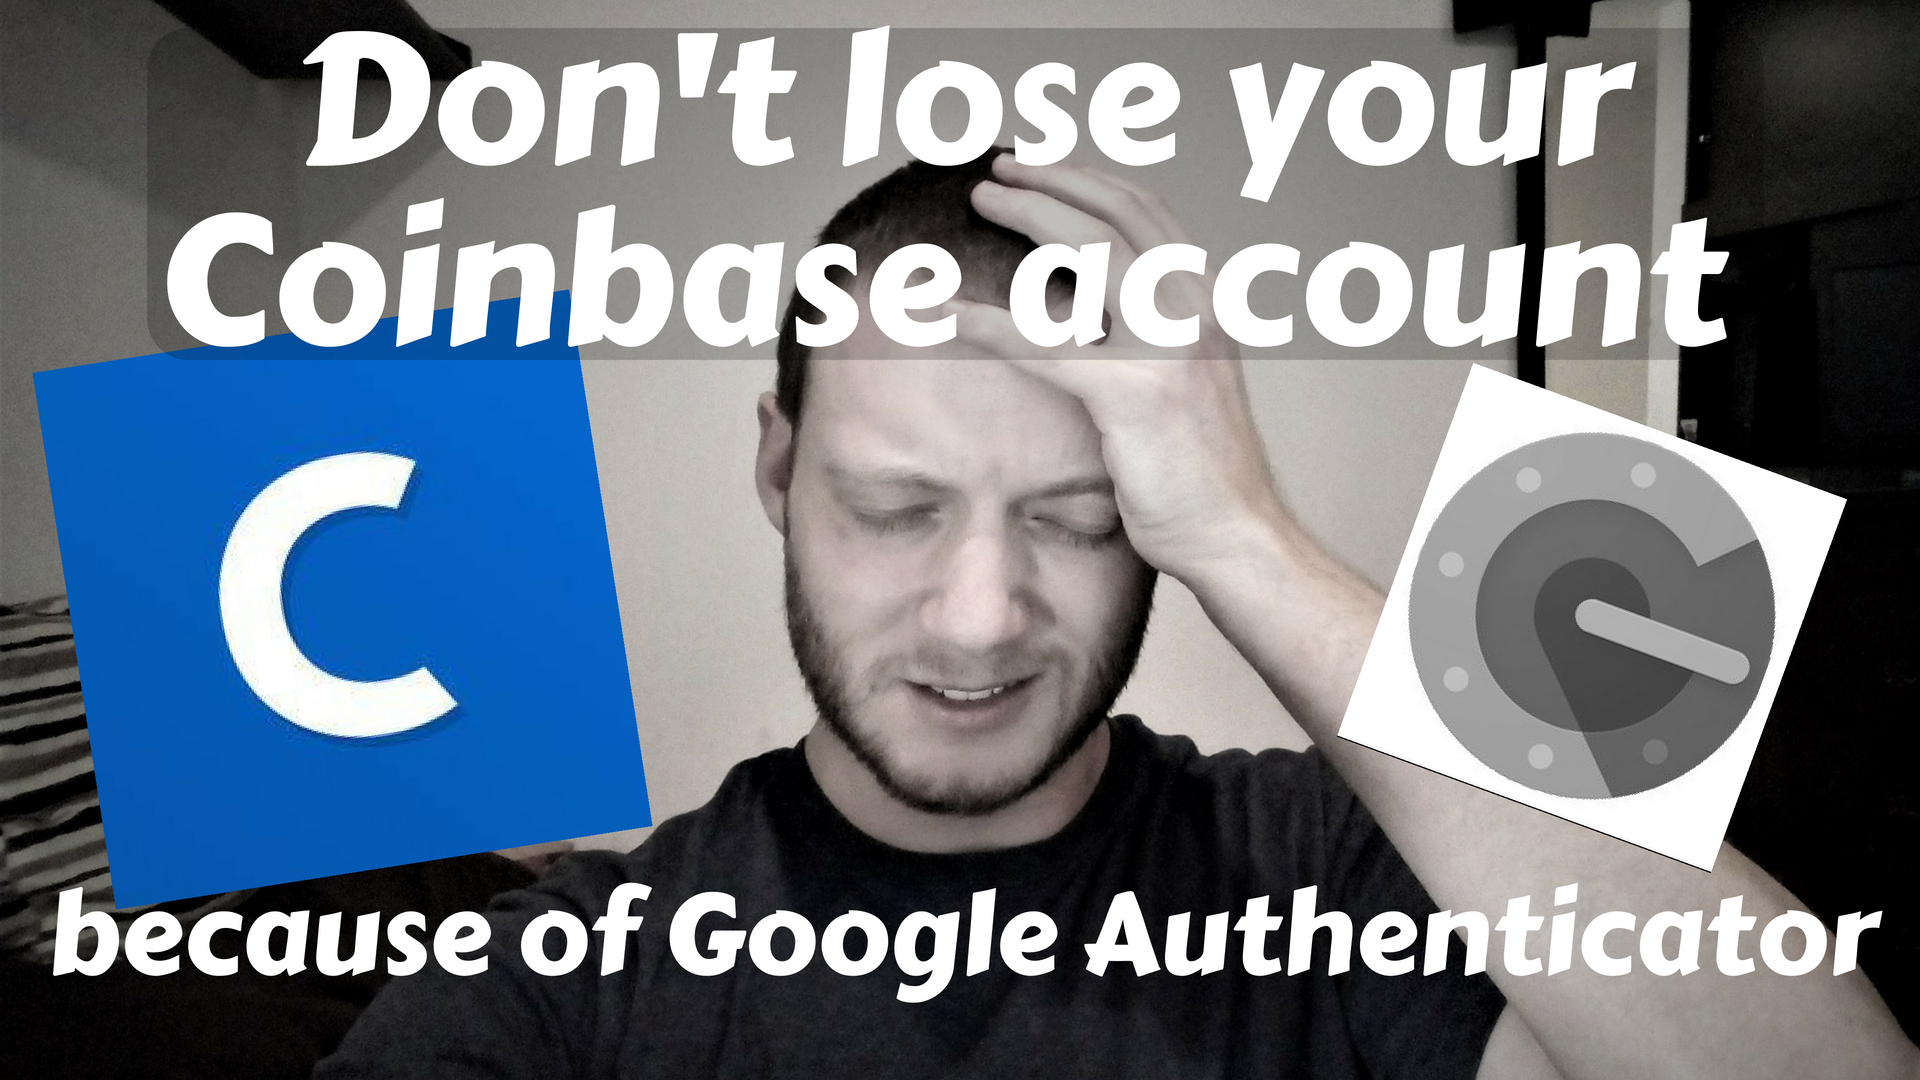 google authenticator code not working coinbase